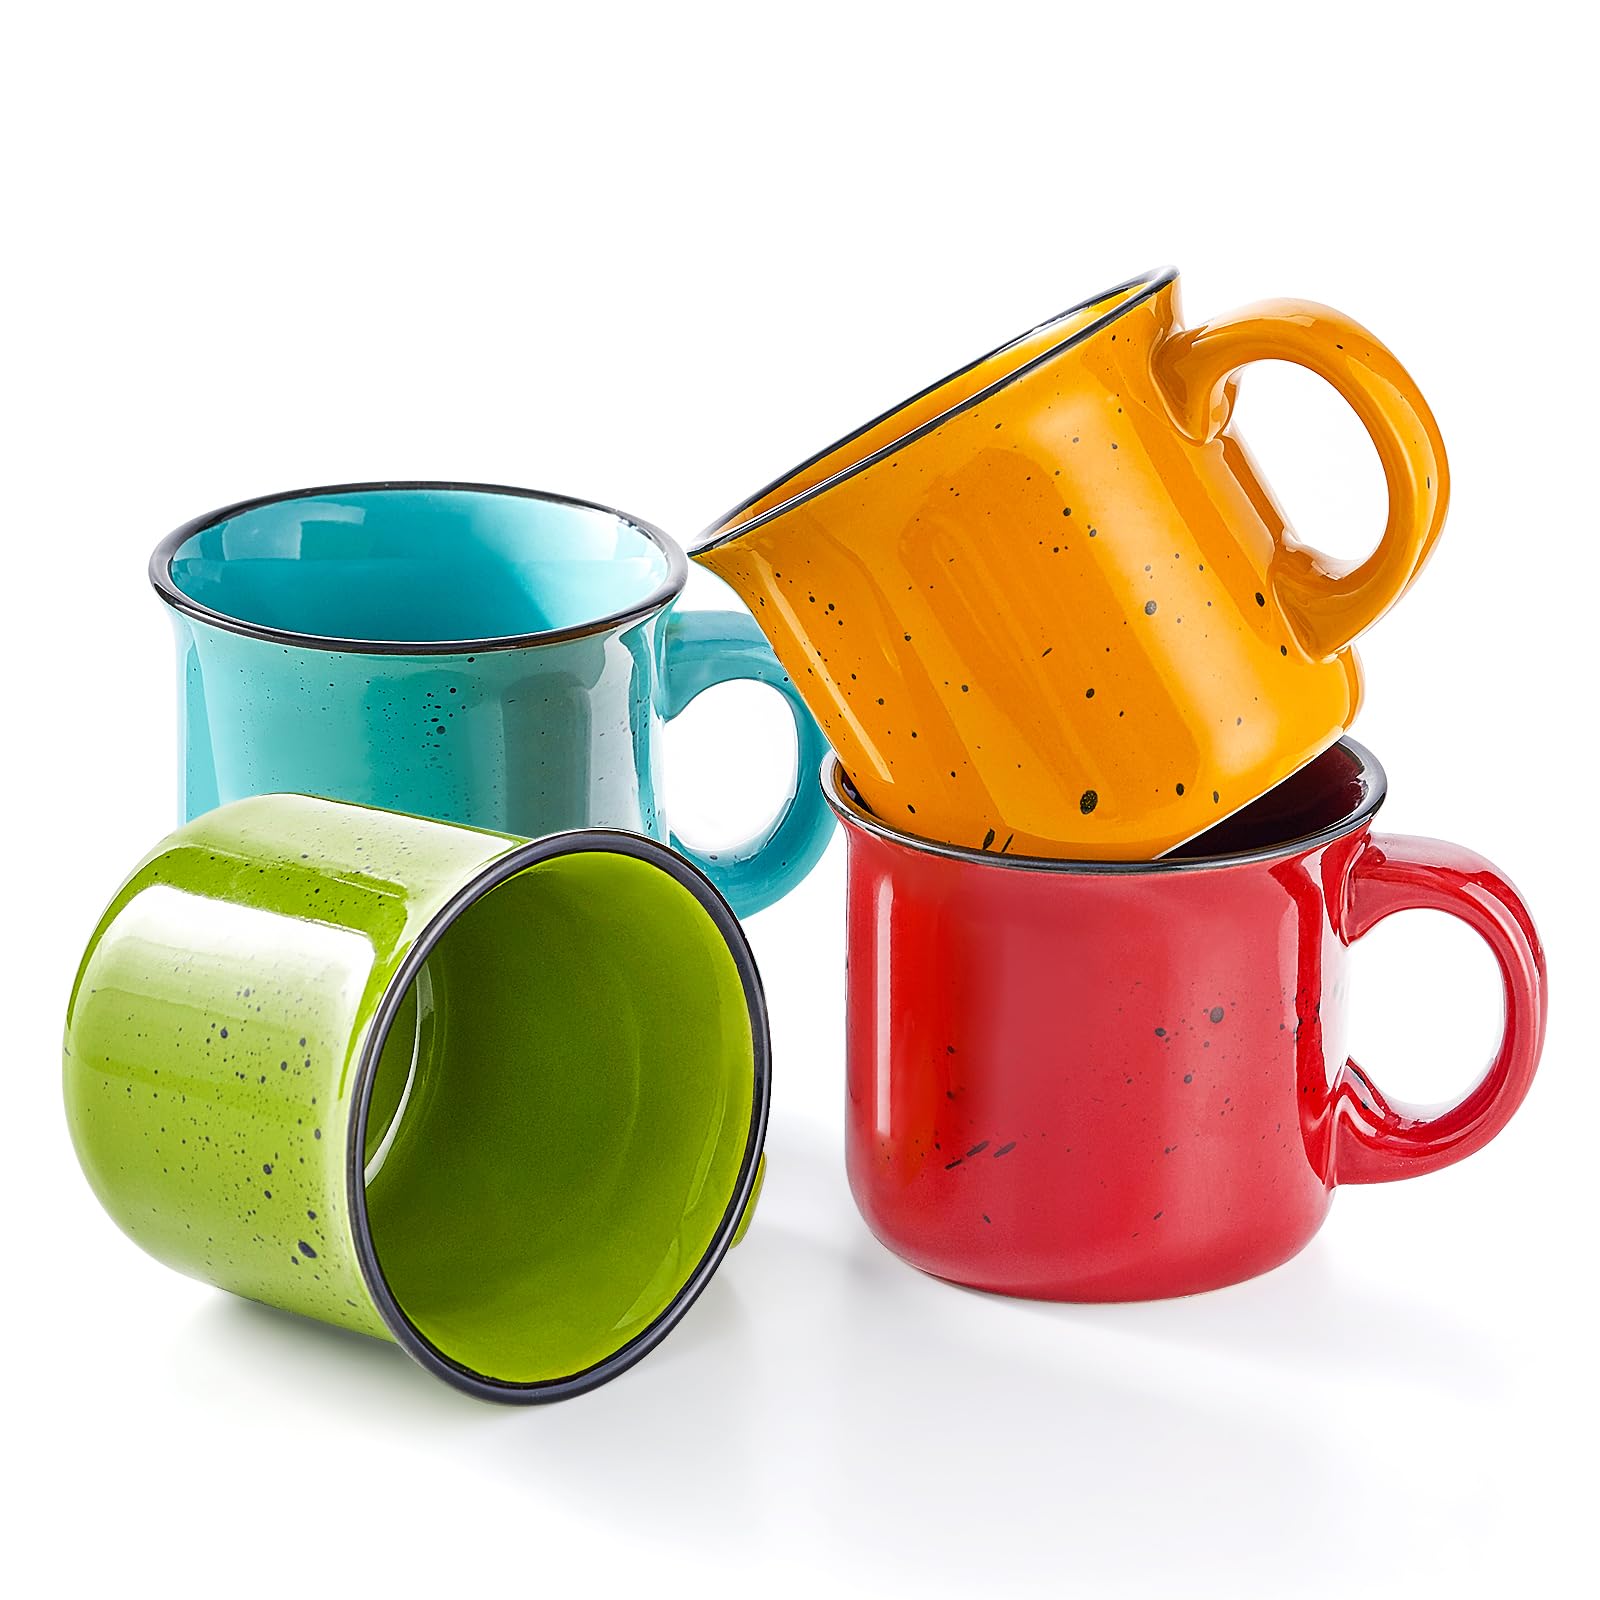 bestone Coffee Mugs Set of 4，16 oz Large Coffee Mugs, Ceramic Mugs with Handles,Coffee,Salad,Noodles etc Coffee Mugs, Cups for Coffee Cereal Latte ，Microwave & Dishwasher safe，Vibrant Colors